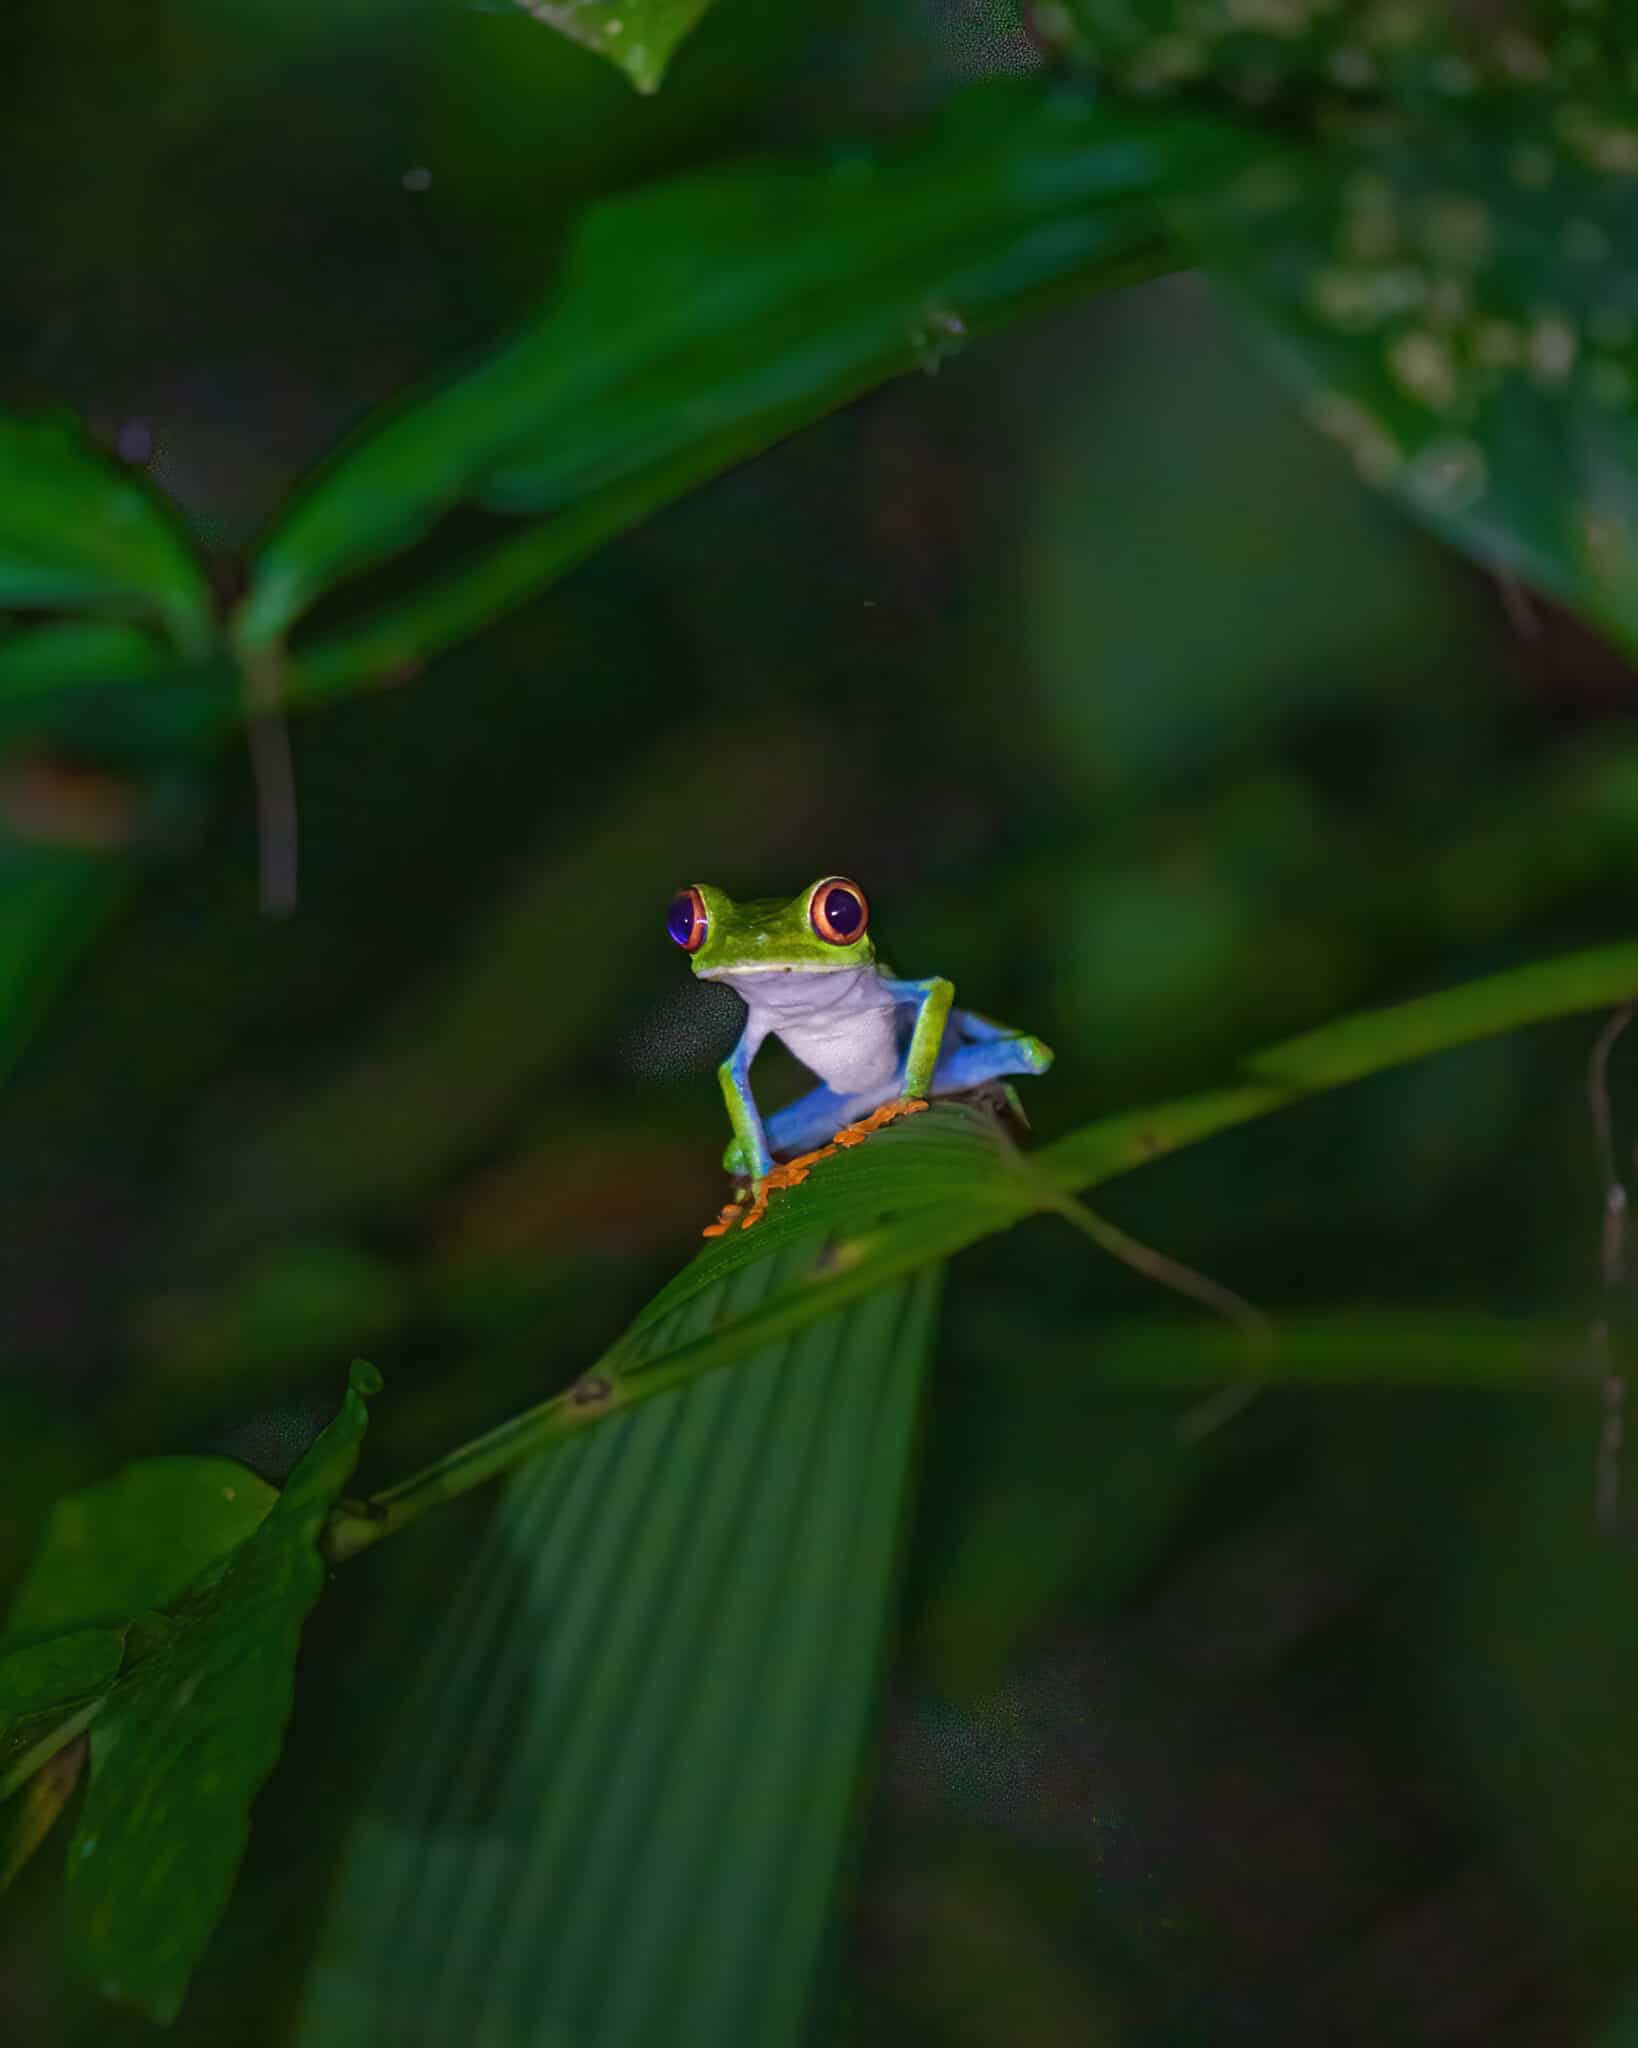 A small frog sits on a leaf in Tortuguero, Costa Rica.